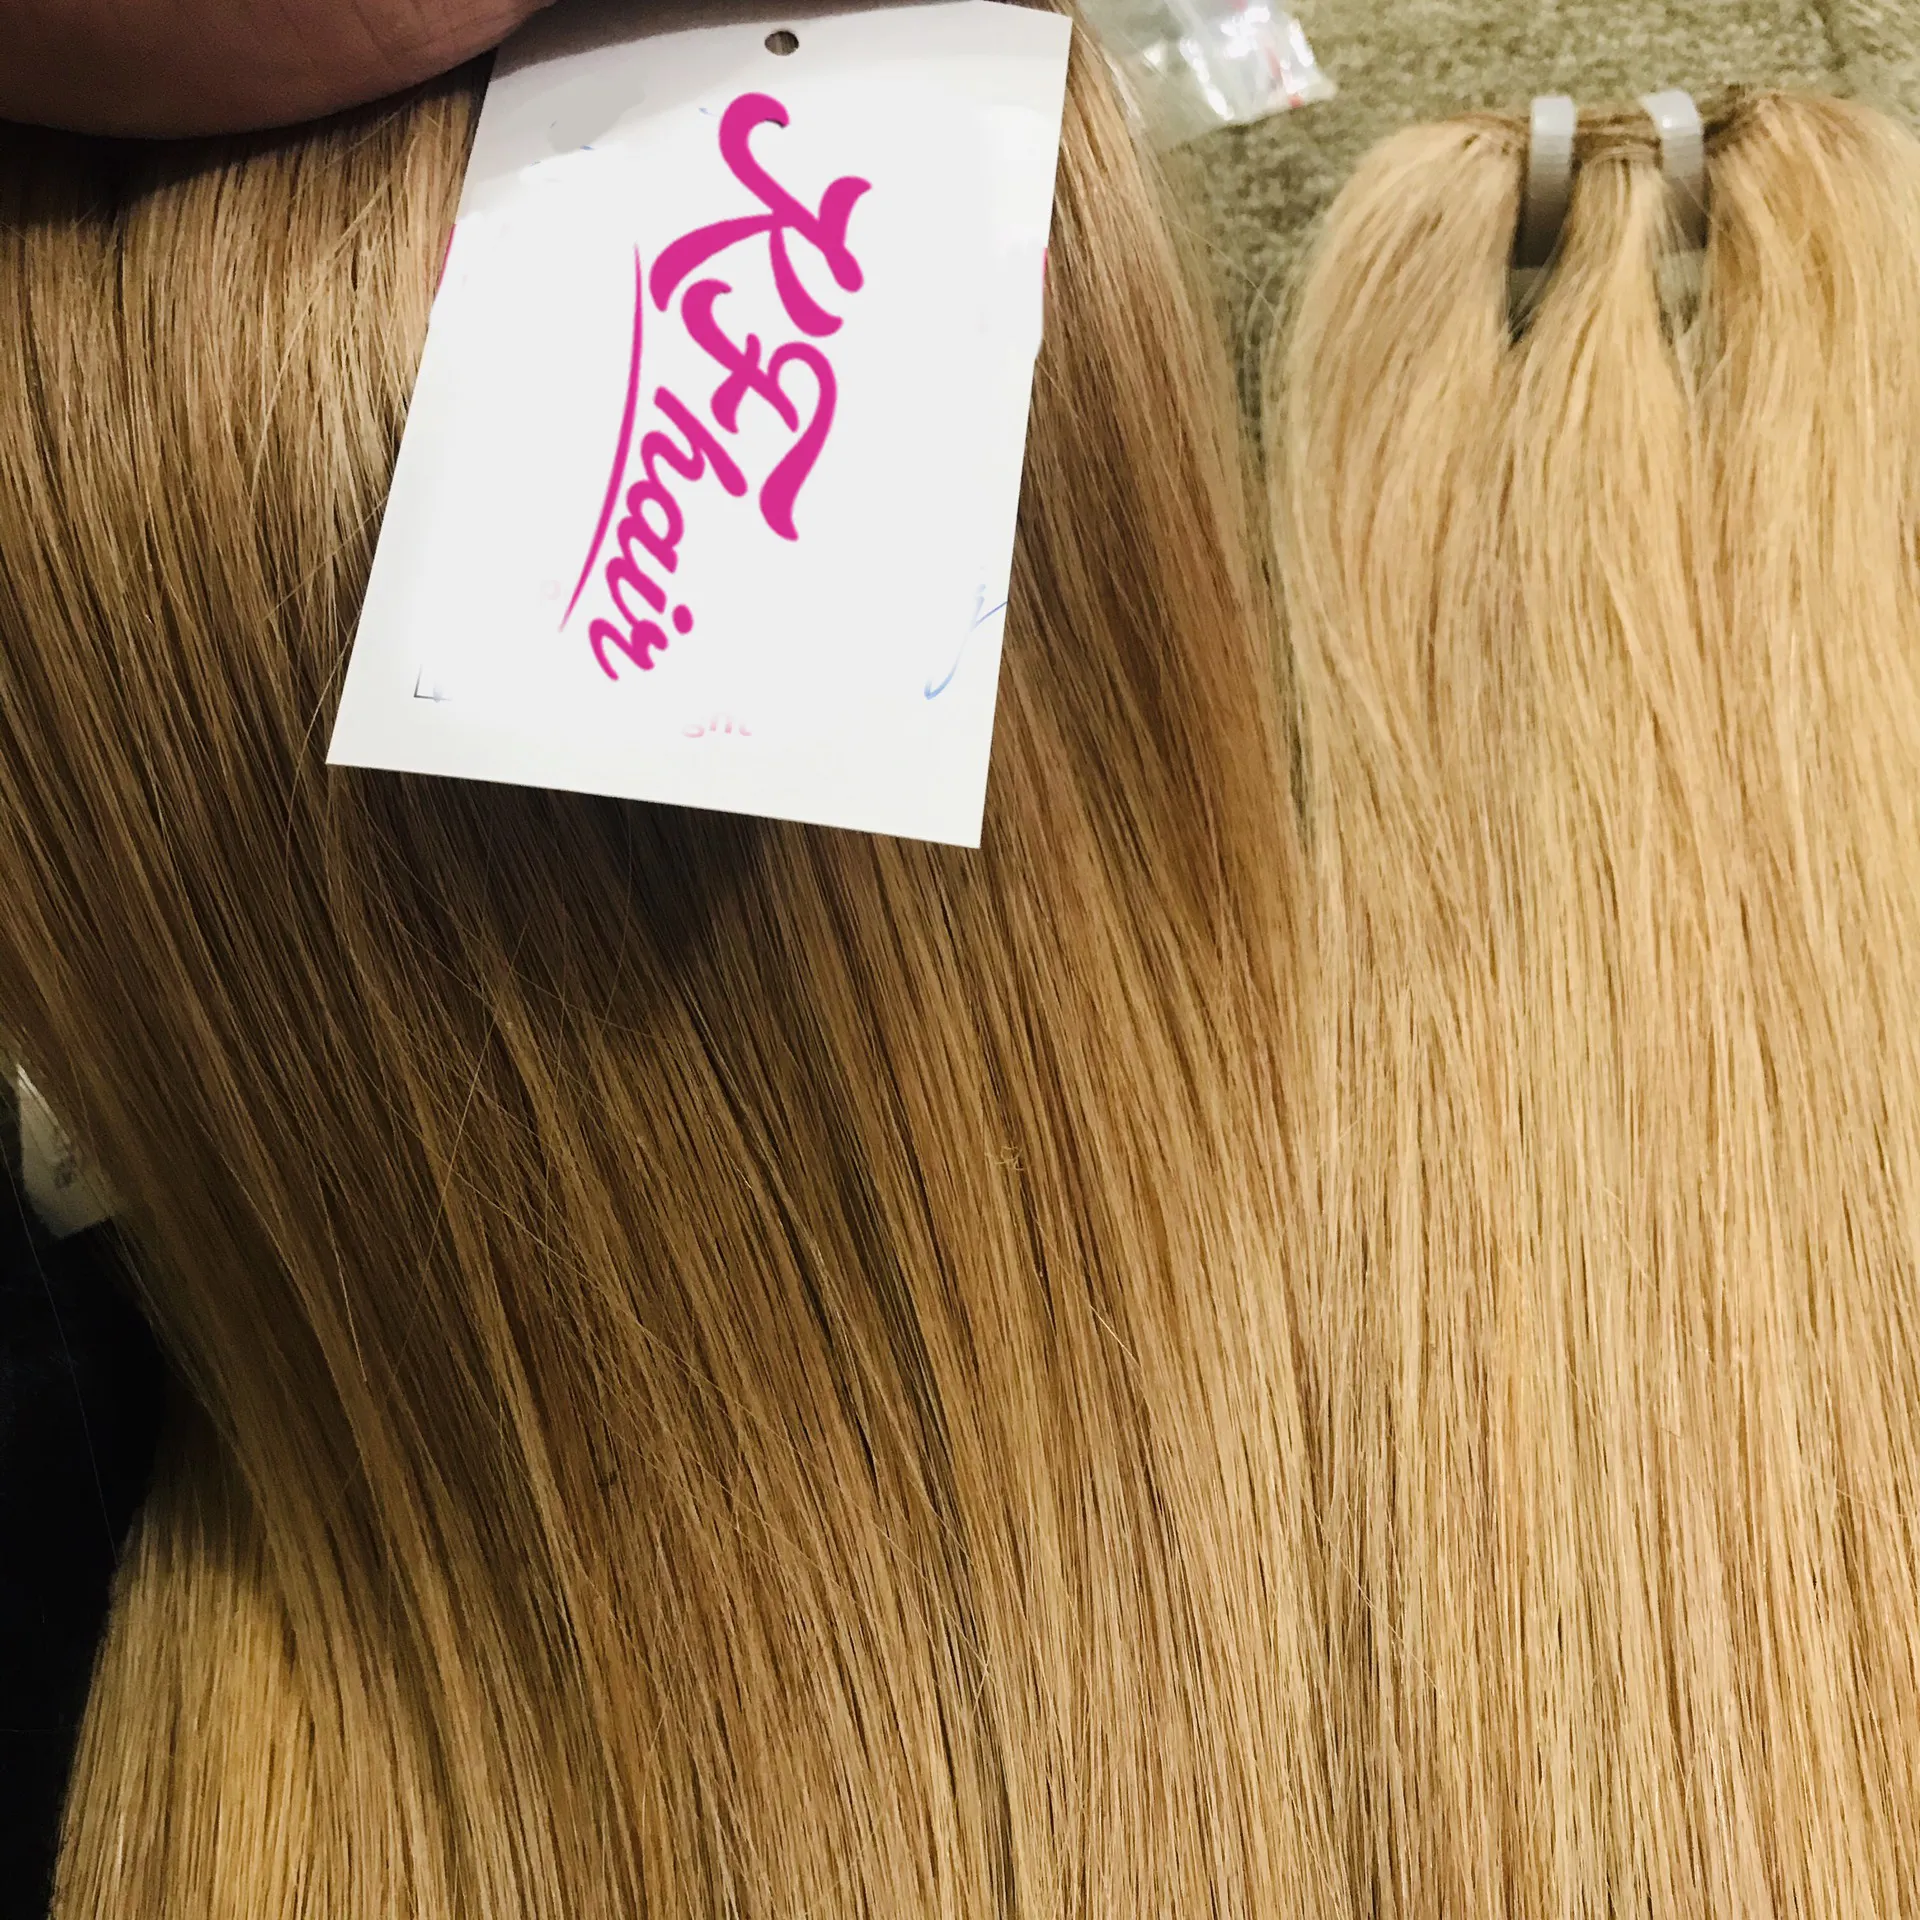 The best wholesale raw vietnamese hair vendor with premium quality hair products of 2021 gold weft hair extensions